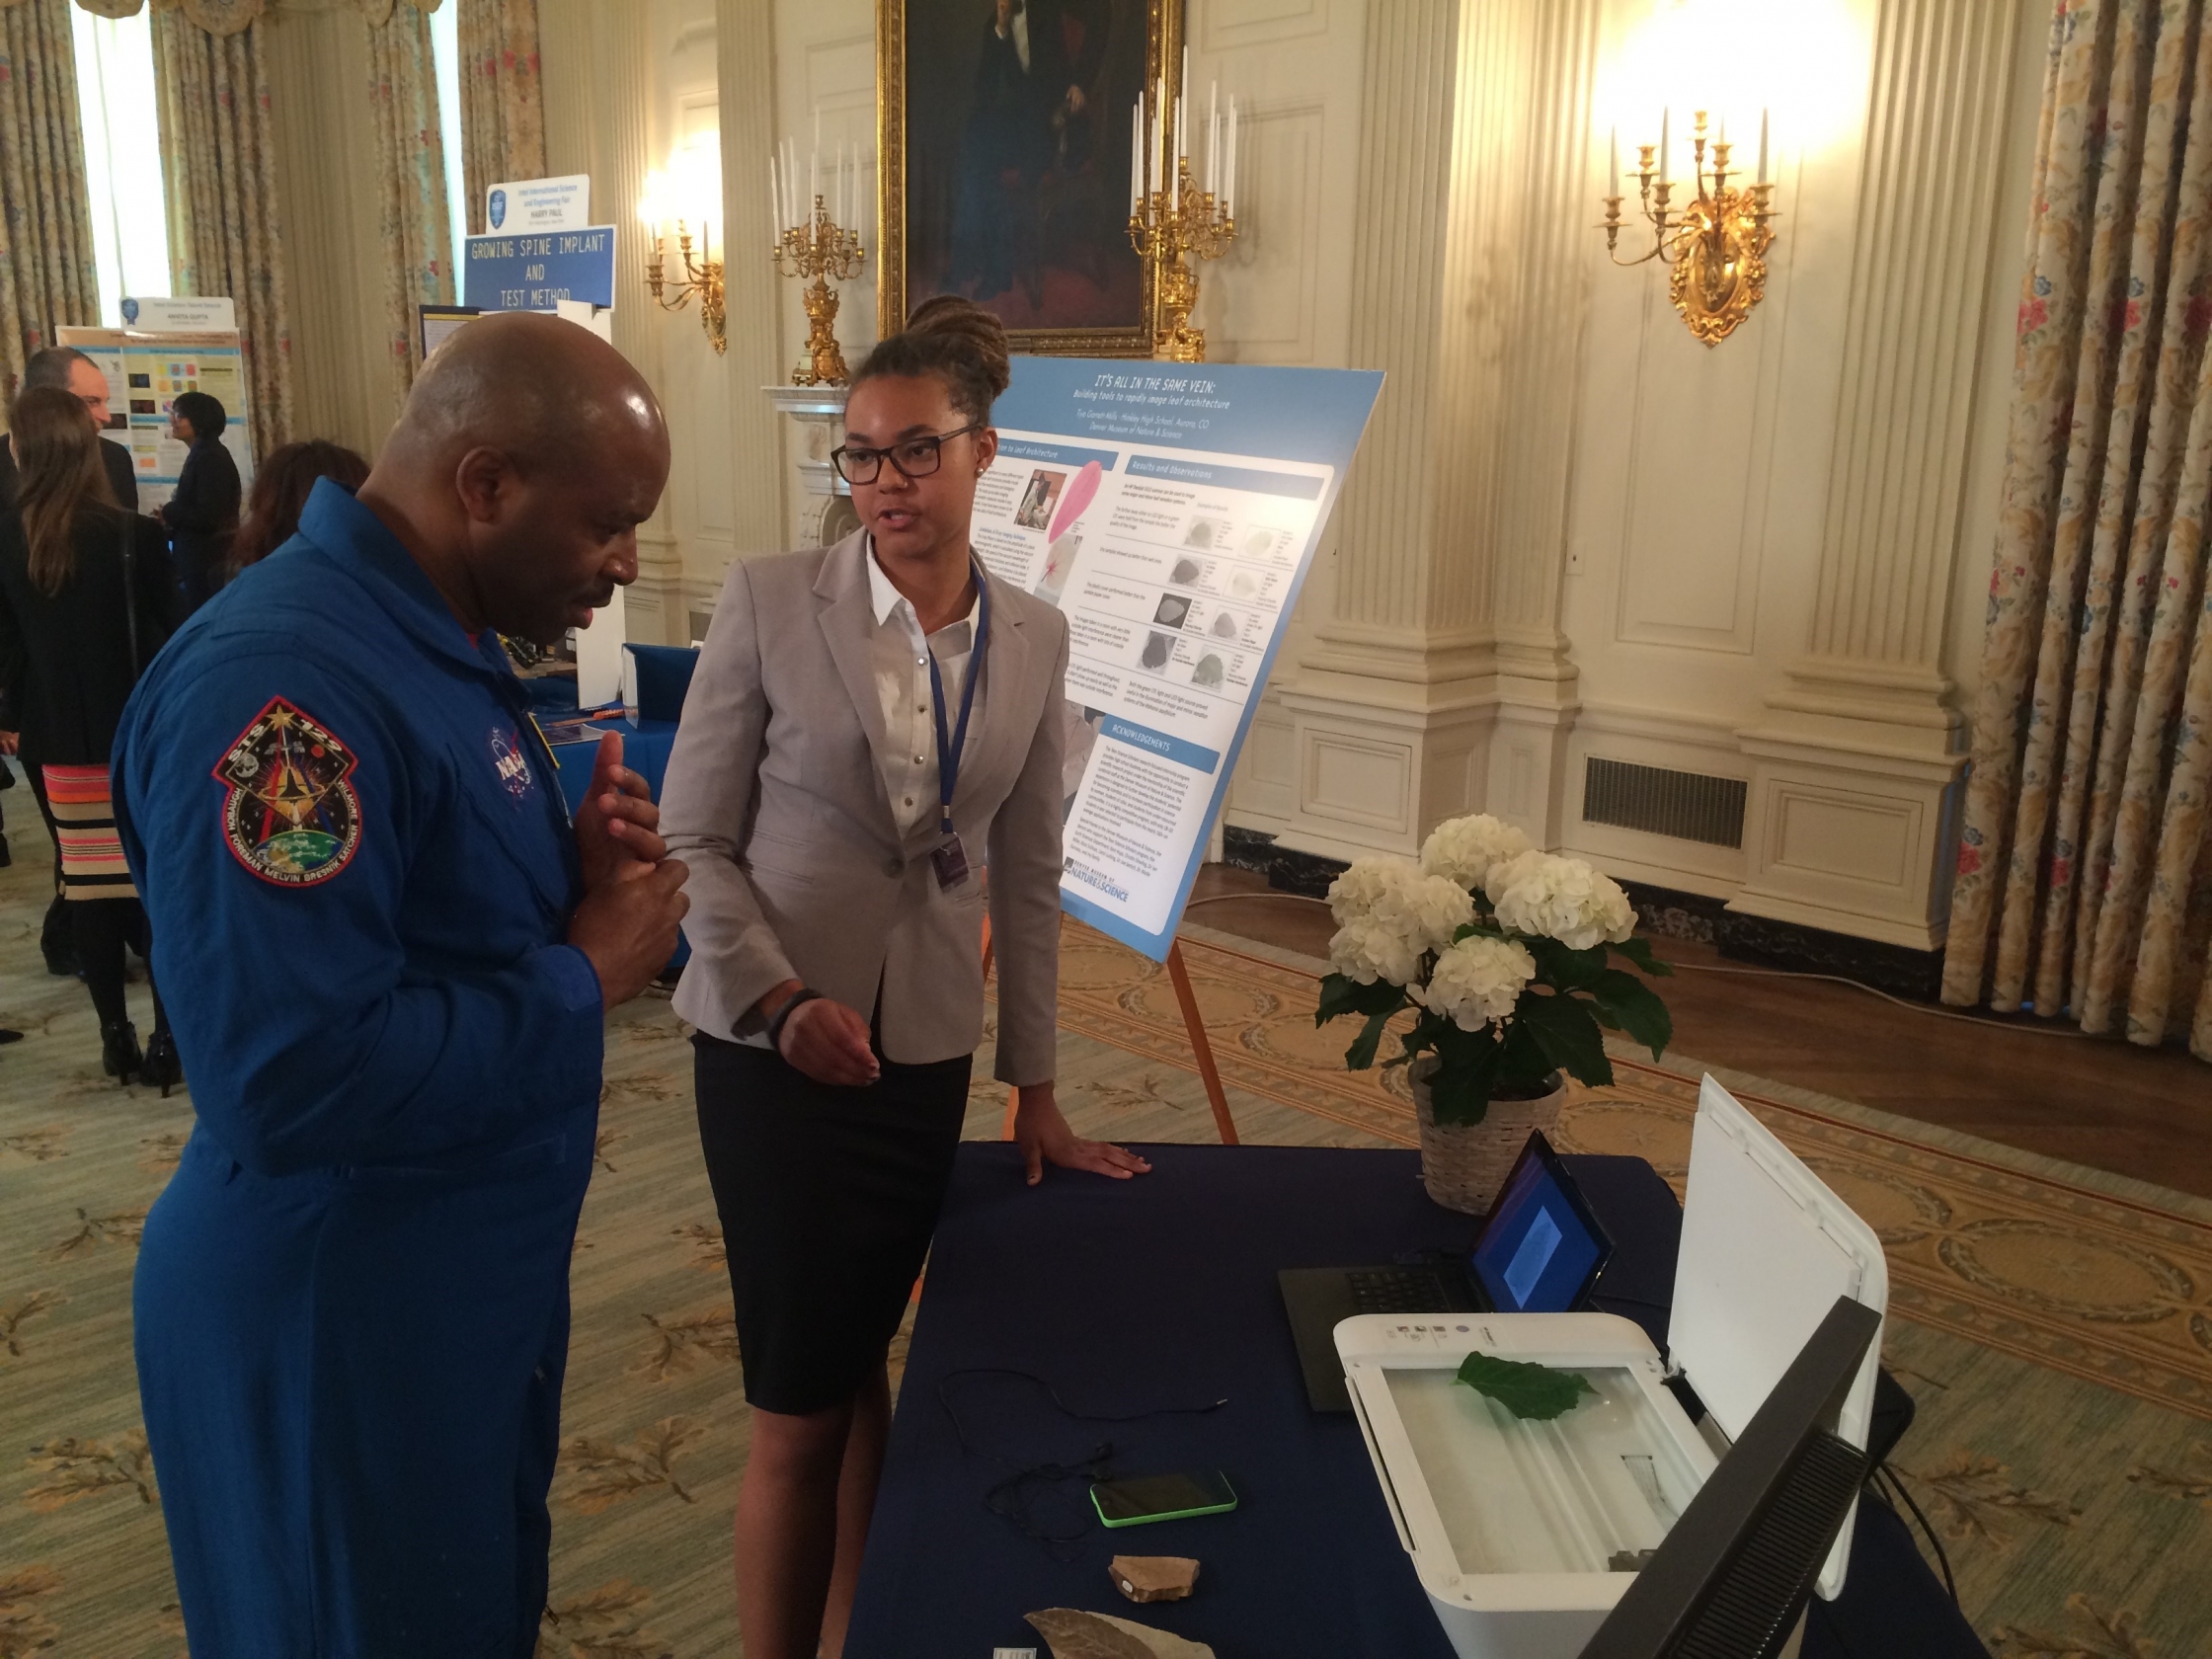 Citizen Science at the 2015 White House Science Fair